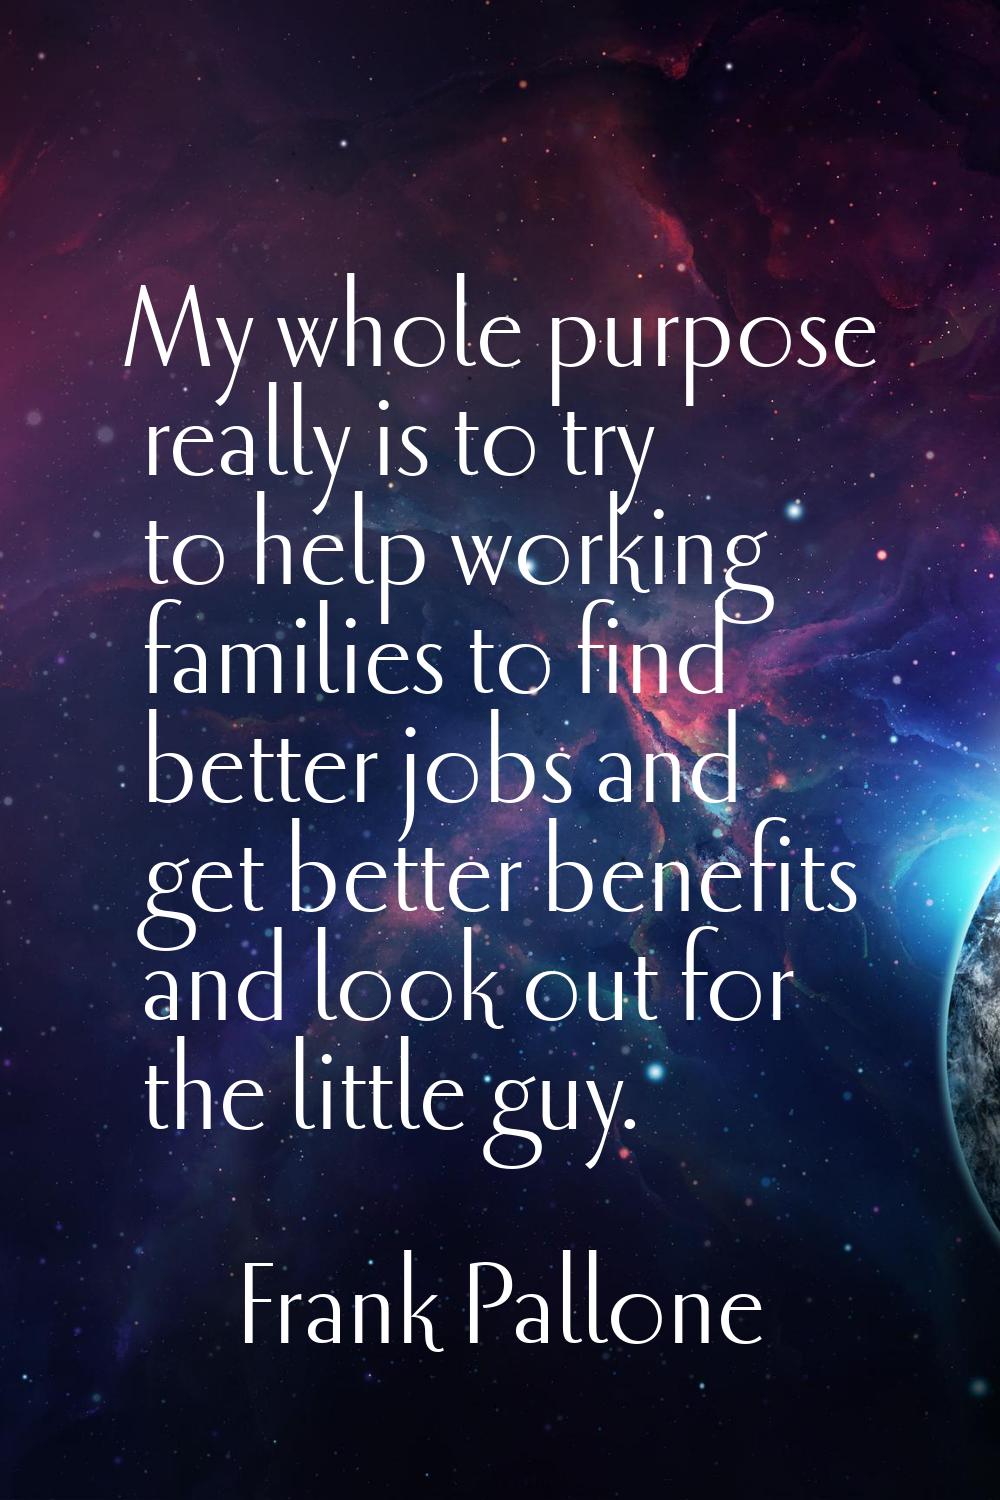 My whole purpose really is to try to help working families to find better jobs and get better benef